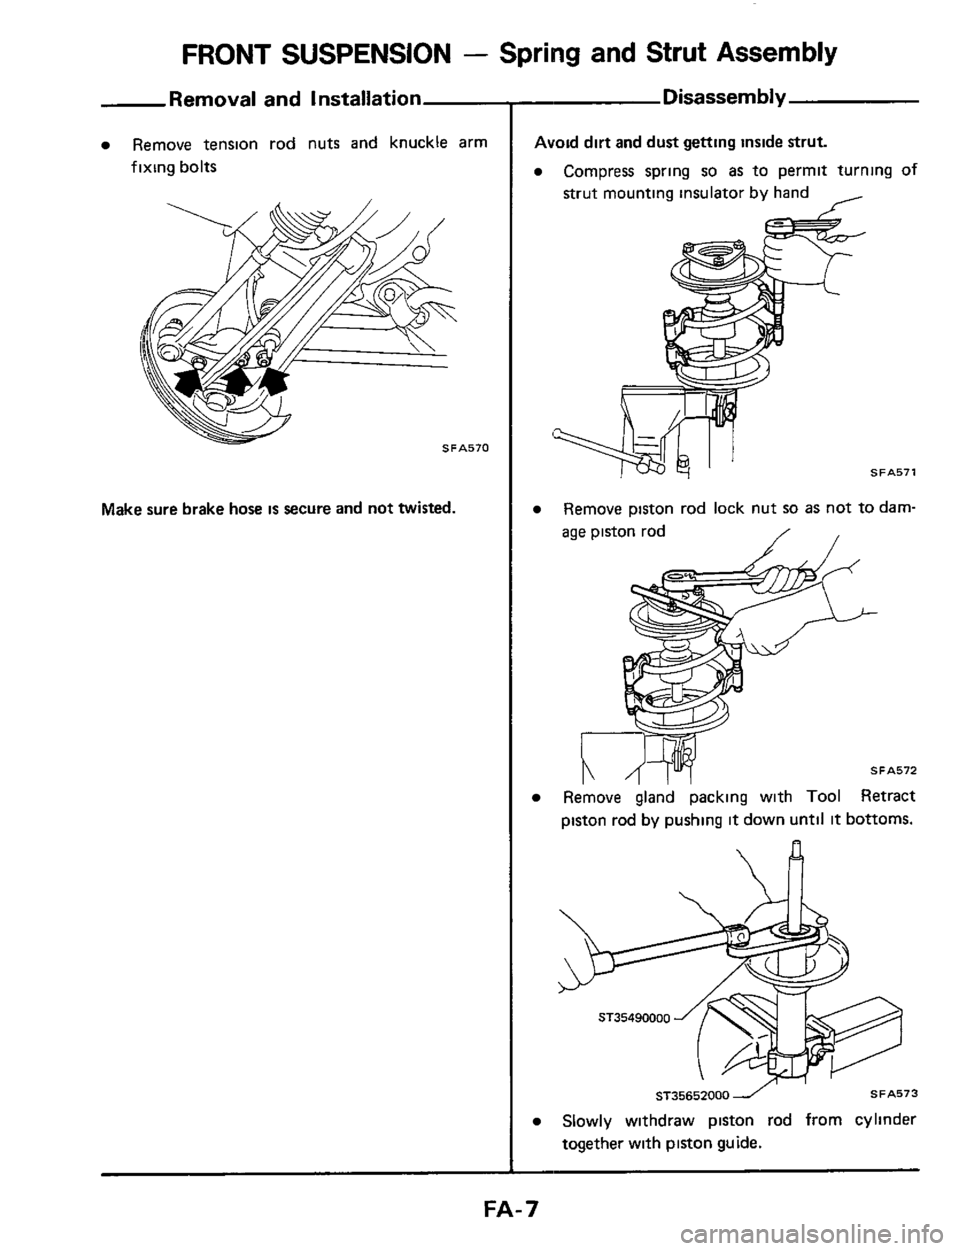 NISSAN 300ZX 1984 Z31 Front Suspension Workshop Manual FRONT SUSPENSION - Spring and Strut Assembly 
Removal and  Installation 
Remove tension rod nuts  and knuckle  arm 
fixing bolts 
Make sure brake hose is secure  and not twisted. 
Disassembly 
Avoid  